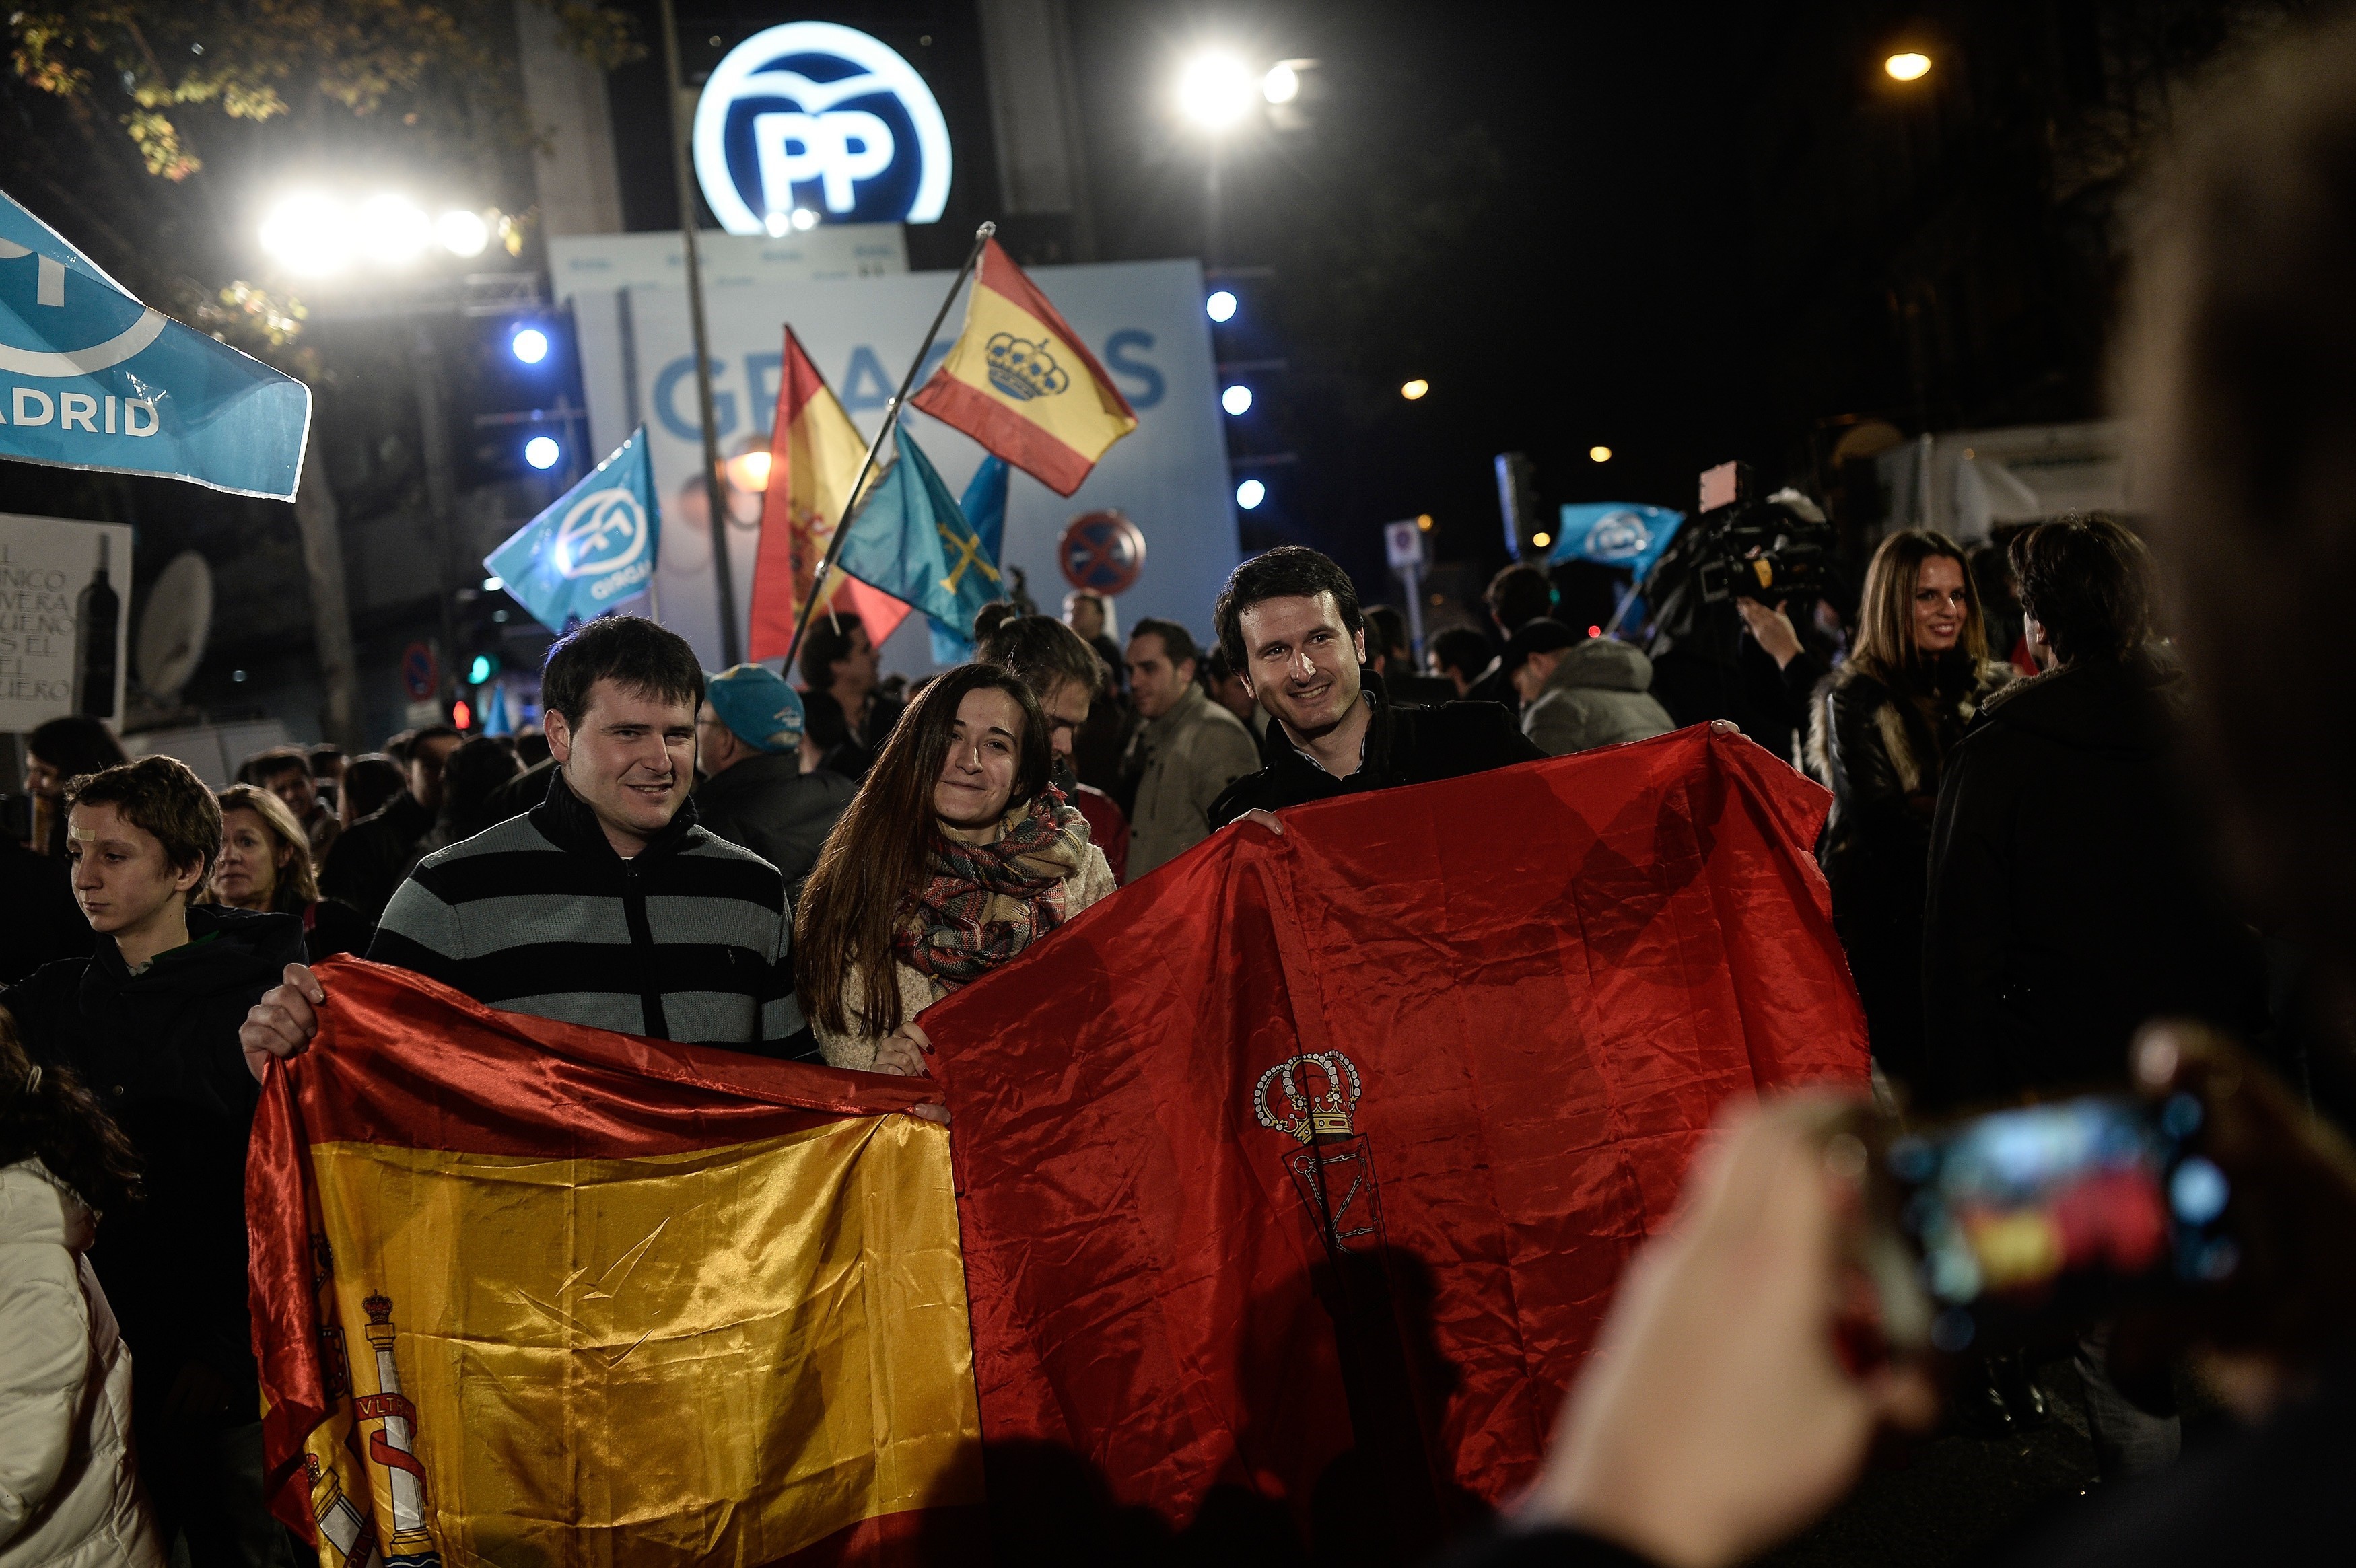 People gather as Spanish Prime Minister and Popular Party (PP) leader, Mariano Rajoy (not seen) gives a speech at his party headquarters'  balcony after Rajoy's party won the most votes of the General Elections during a public meeting with supporters in Madrid, Spain on Dec. 21, 2015. (Burak Akbulut/Anadolu Agency/Getty Images)